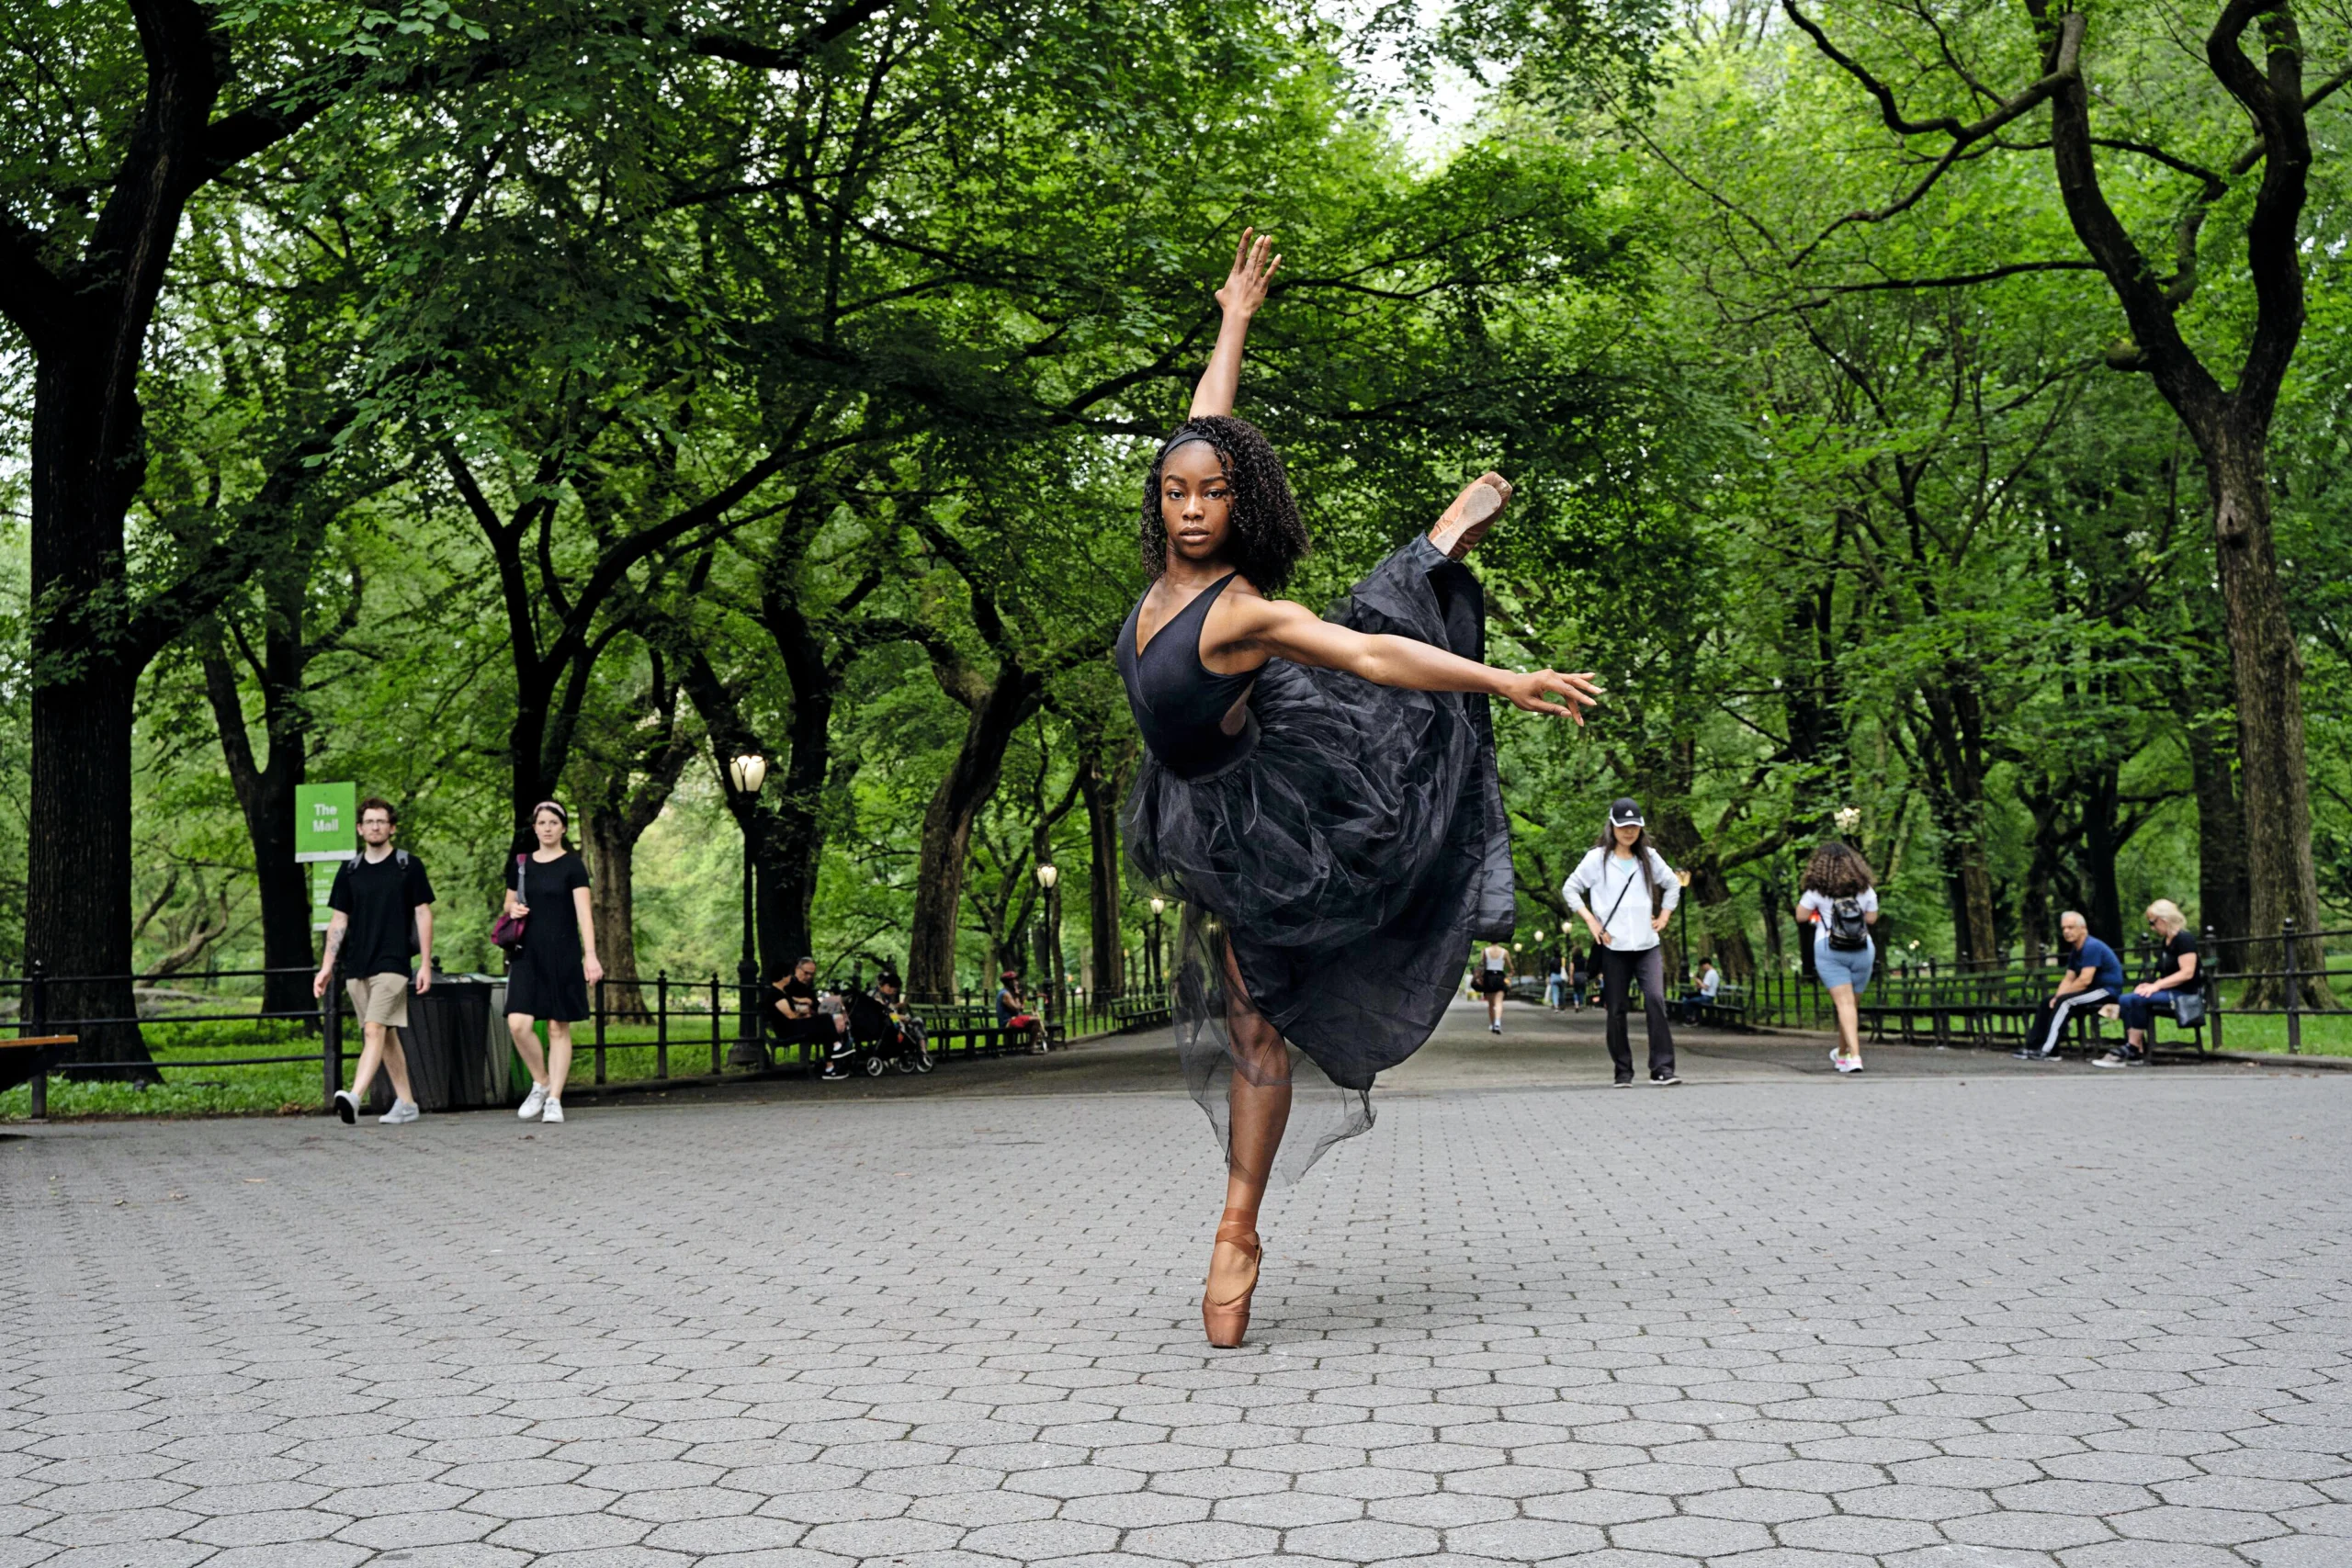 Outside in a public park, a young Black ballerina poses in a dramatic attitude derriere en croise. She wears a black dance dress and flesh-colored pointe shoes.